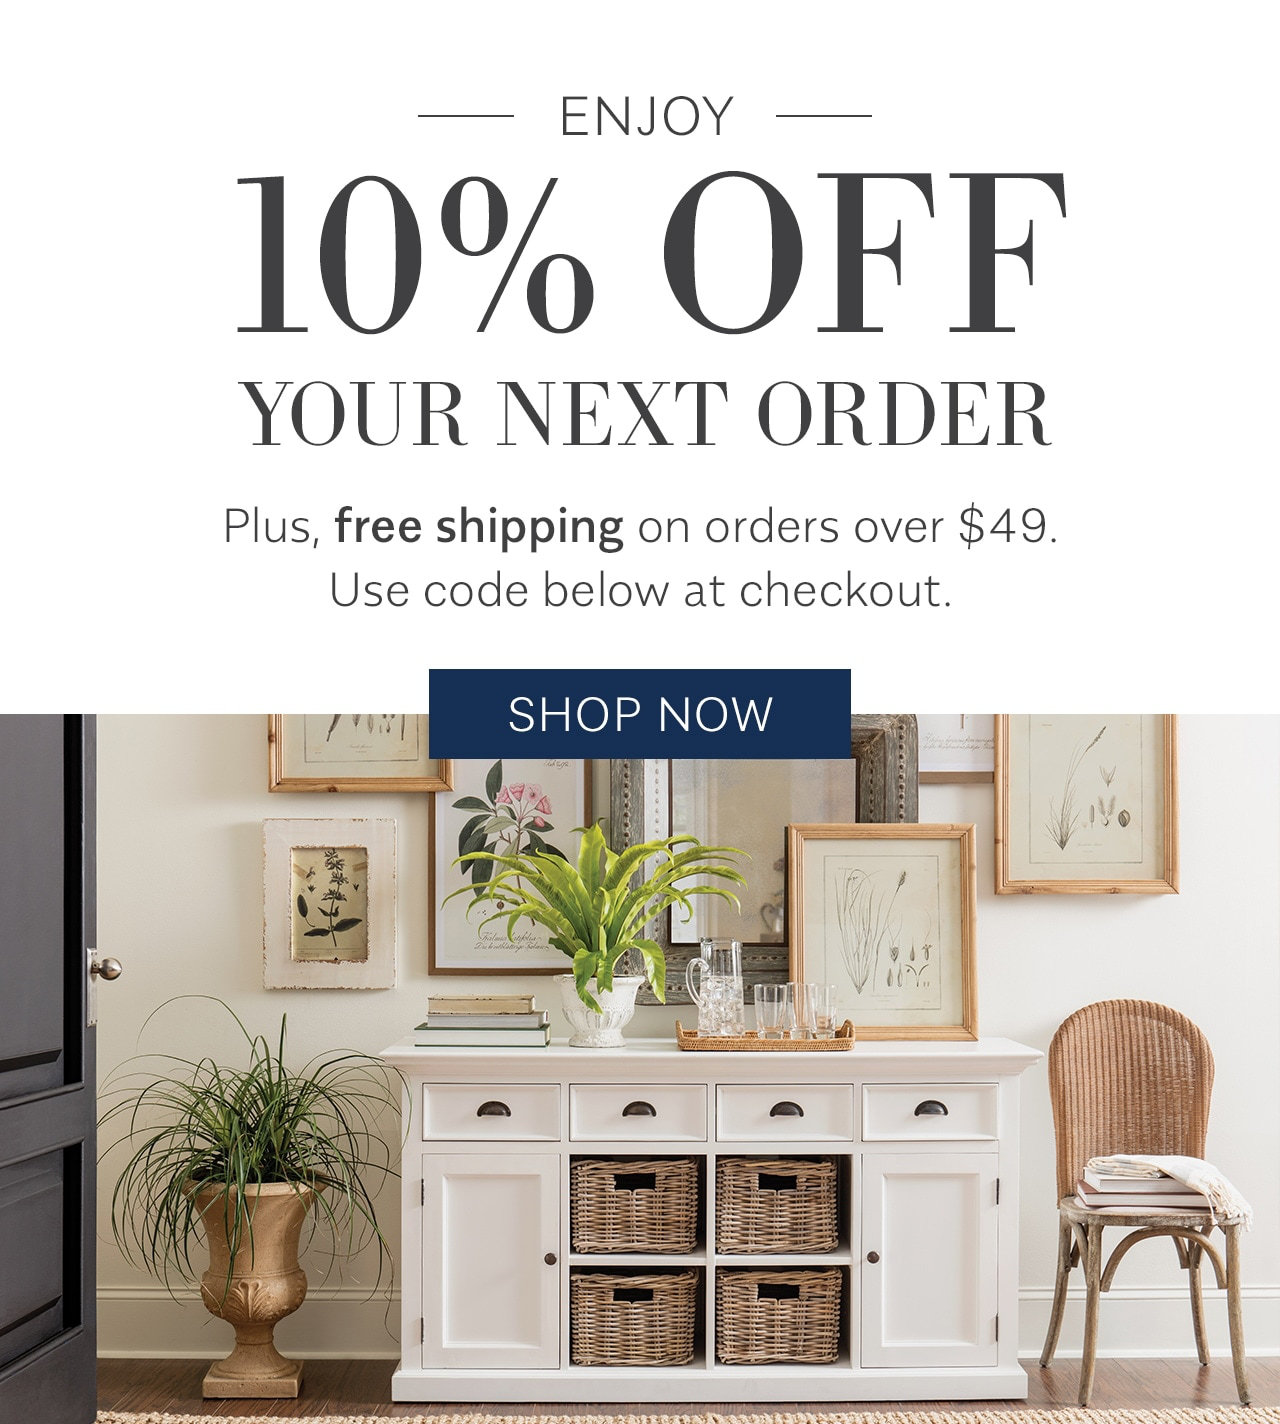 Enjoy 10% off your next order. Plus, free shipping on orders over $49. Use code below - Shop Now